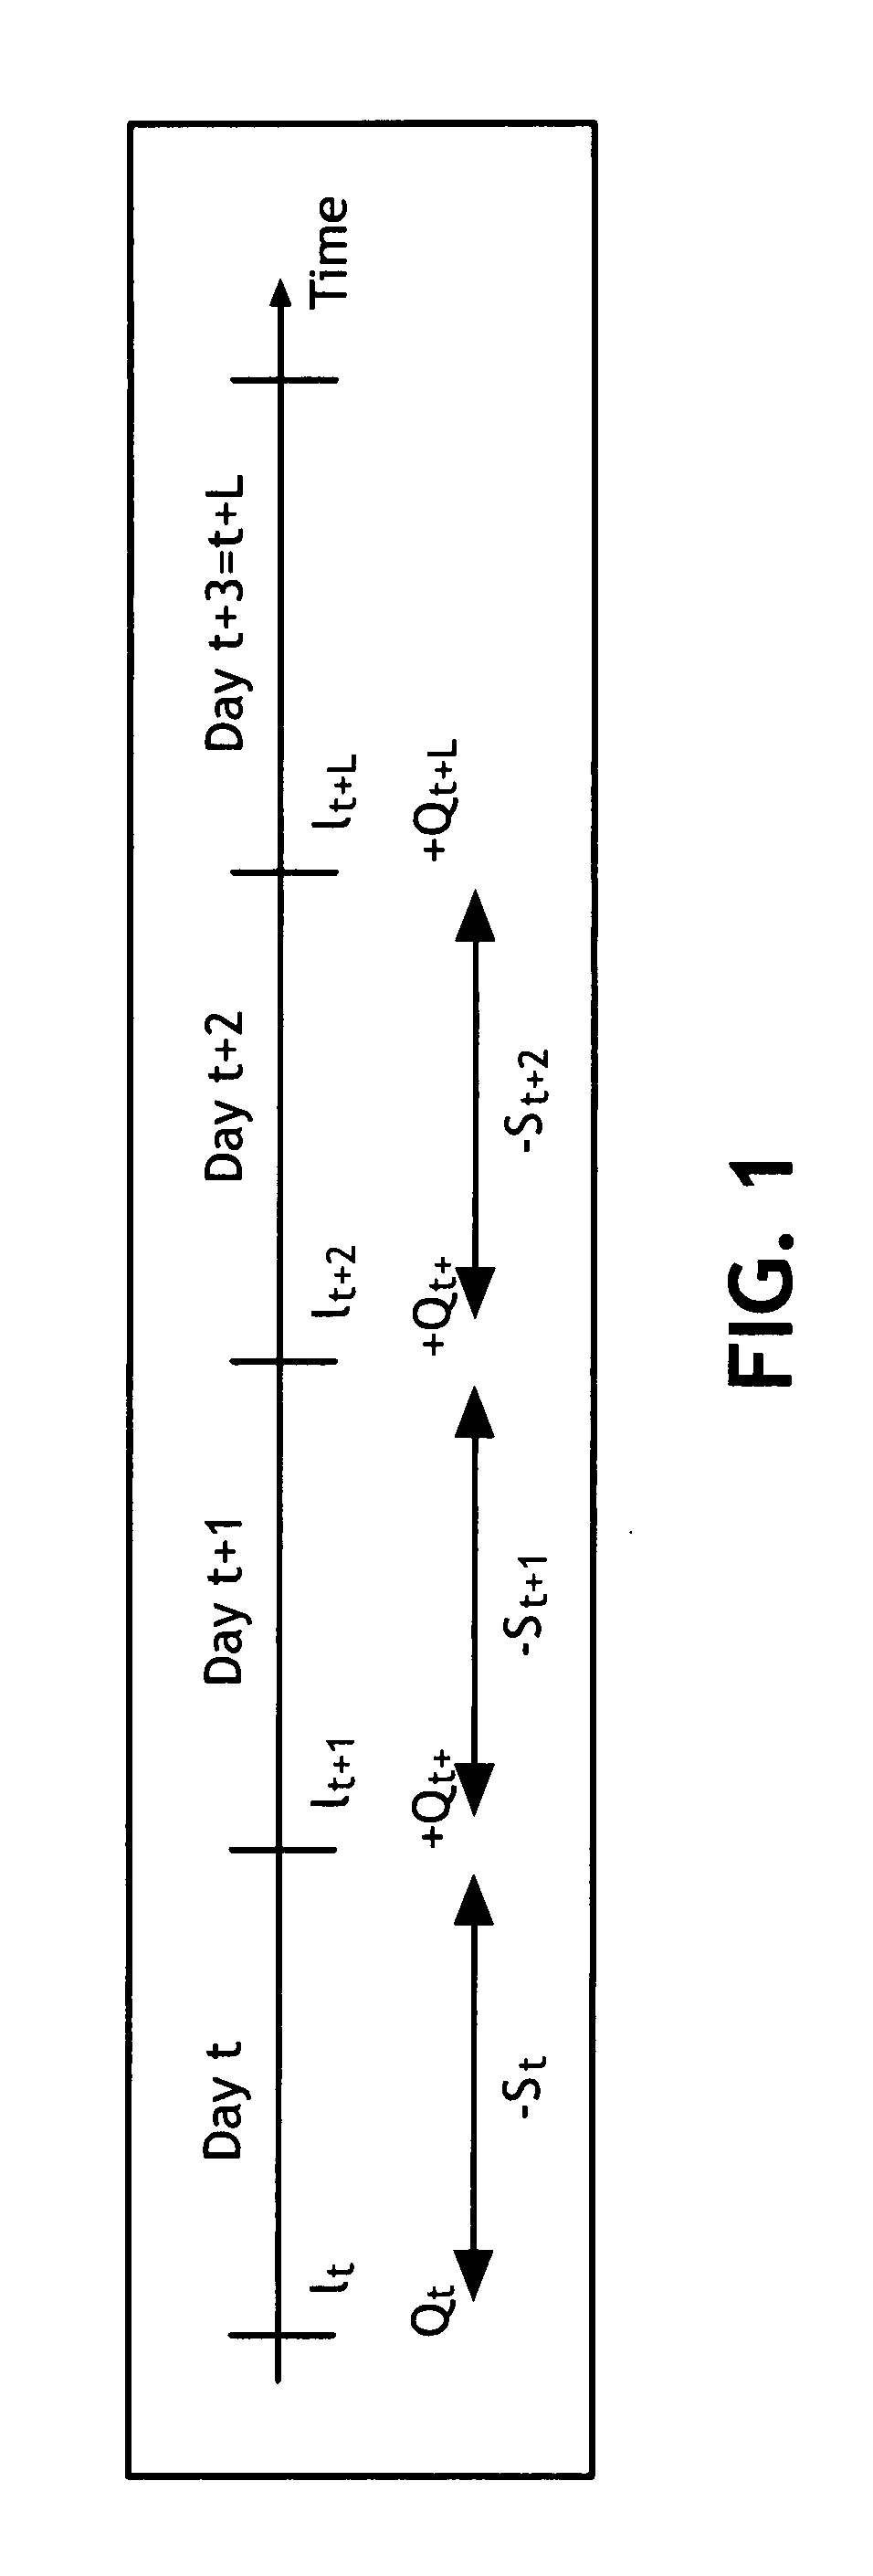 System and method for managing a collection of stock replenishment systems